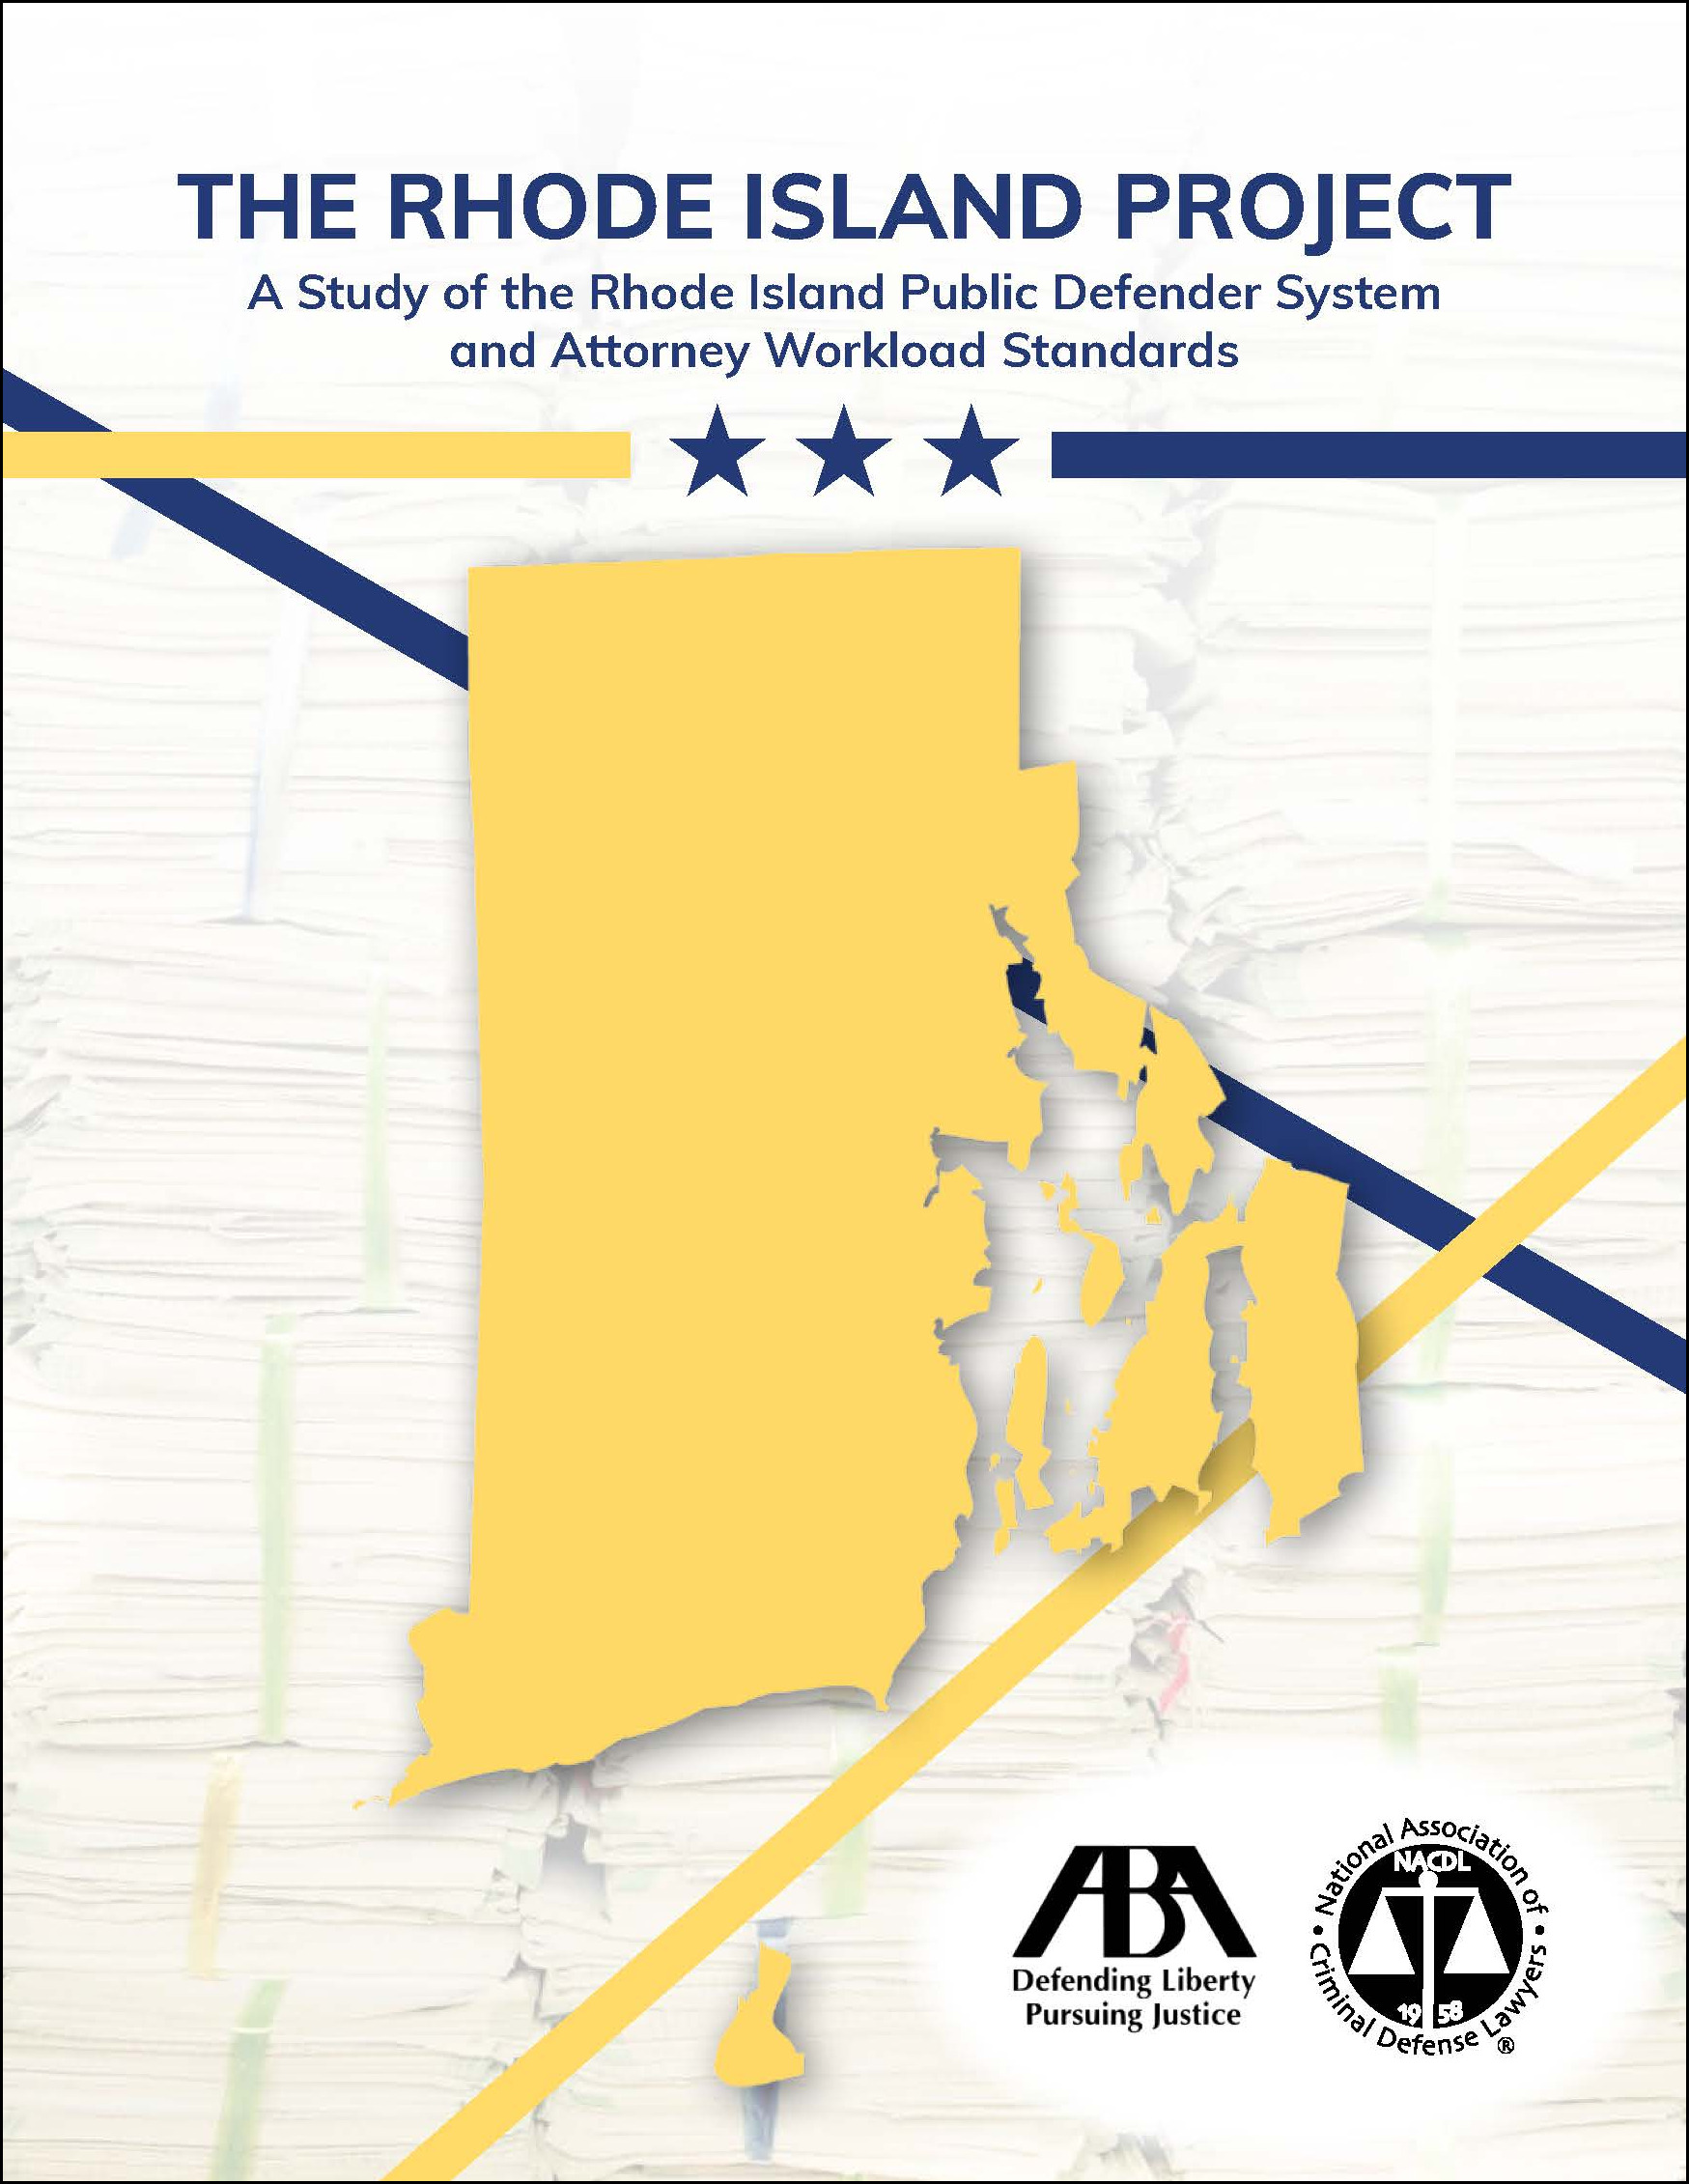 Cover for NACDL report The Rhode Island Project: A Study of the Rhode Island Public Defender System and Attorney Workload Standards